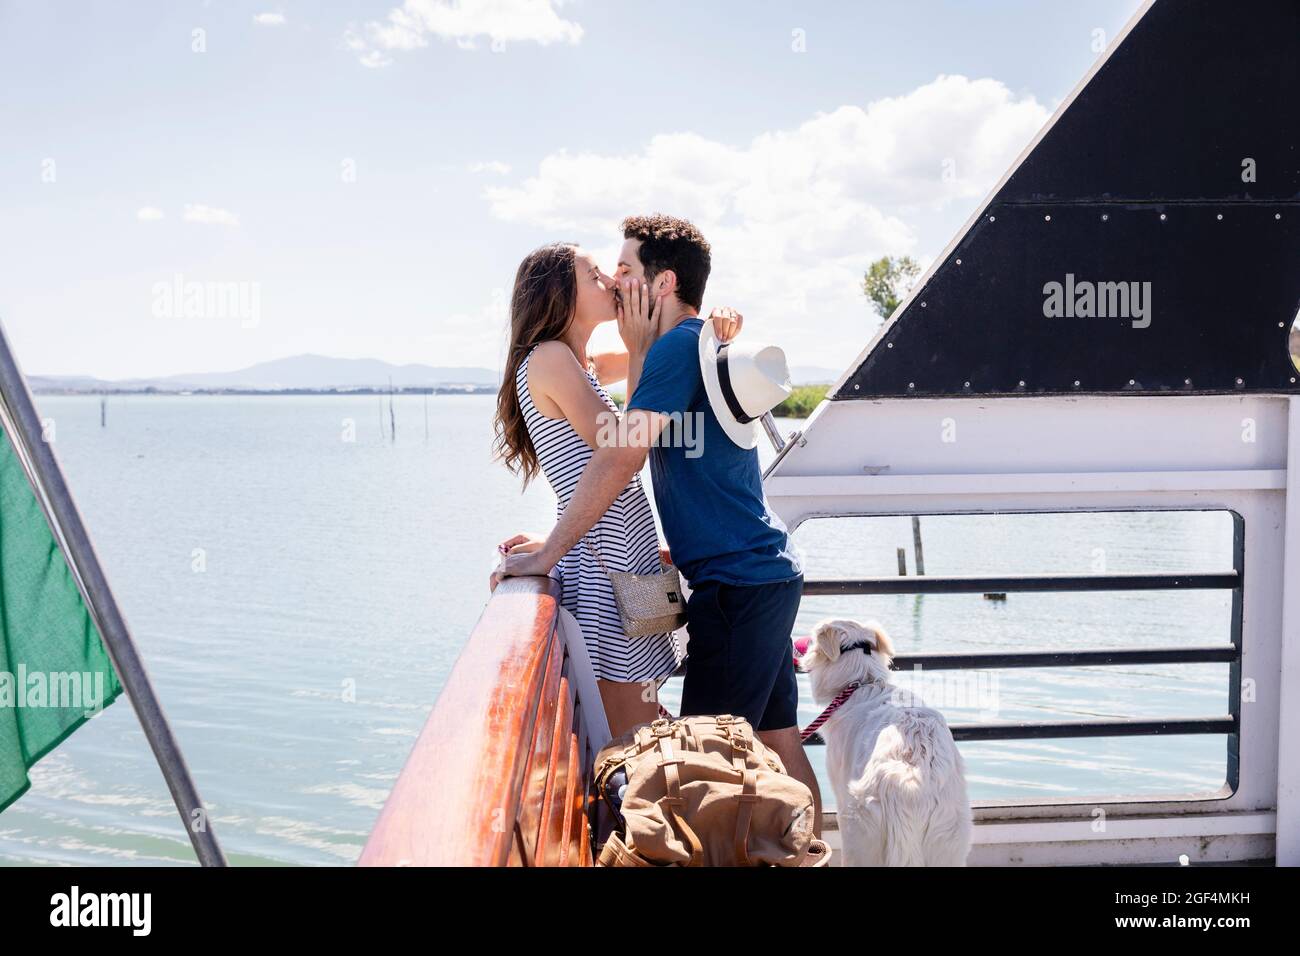 Couple kissing each other while standing at ferry boat Stock Photo